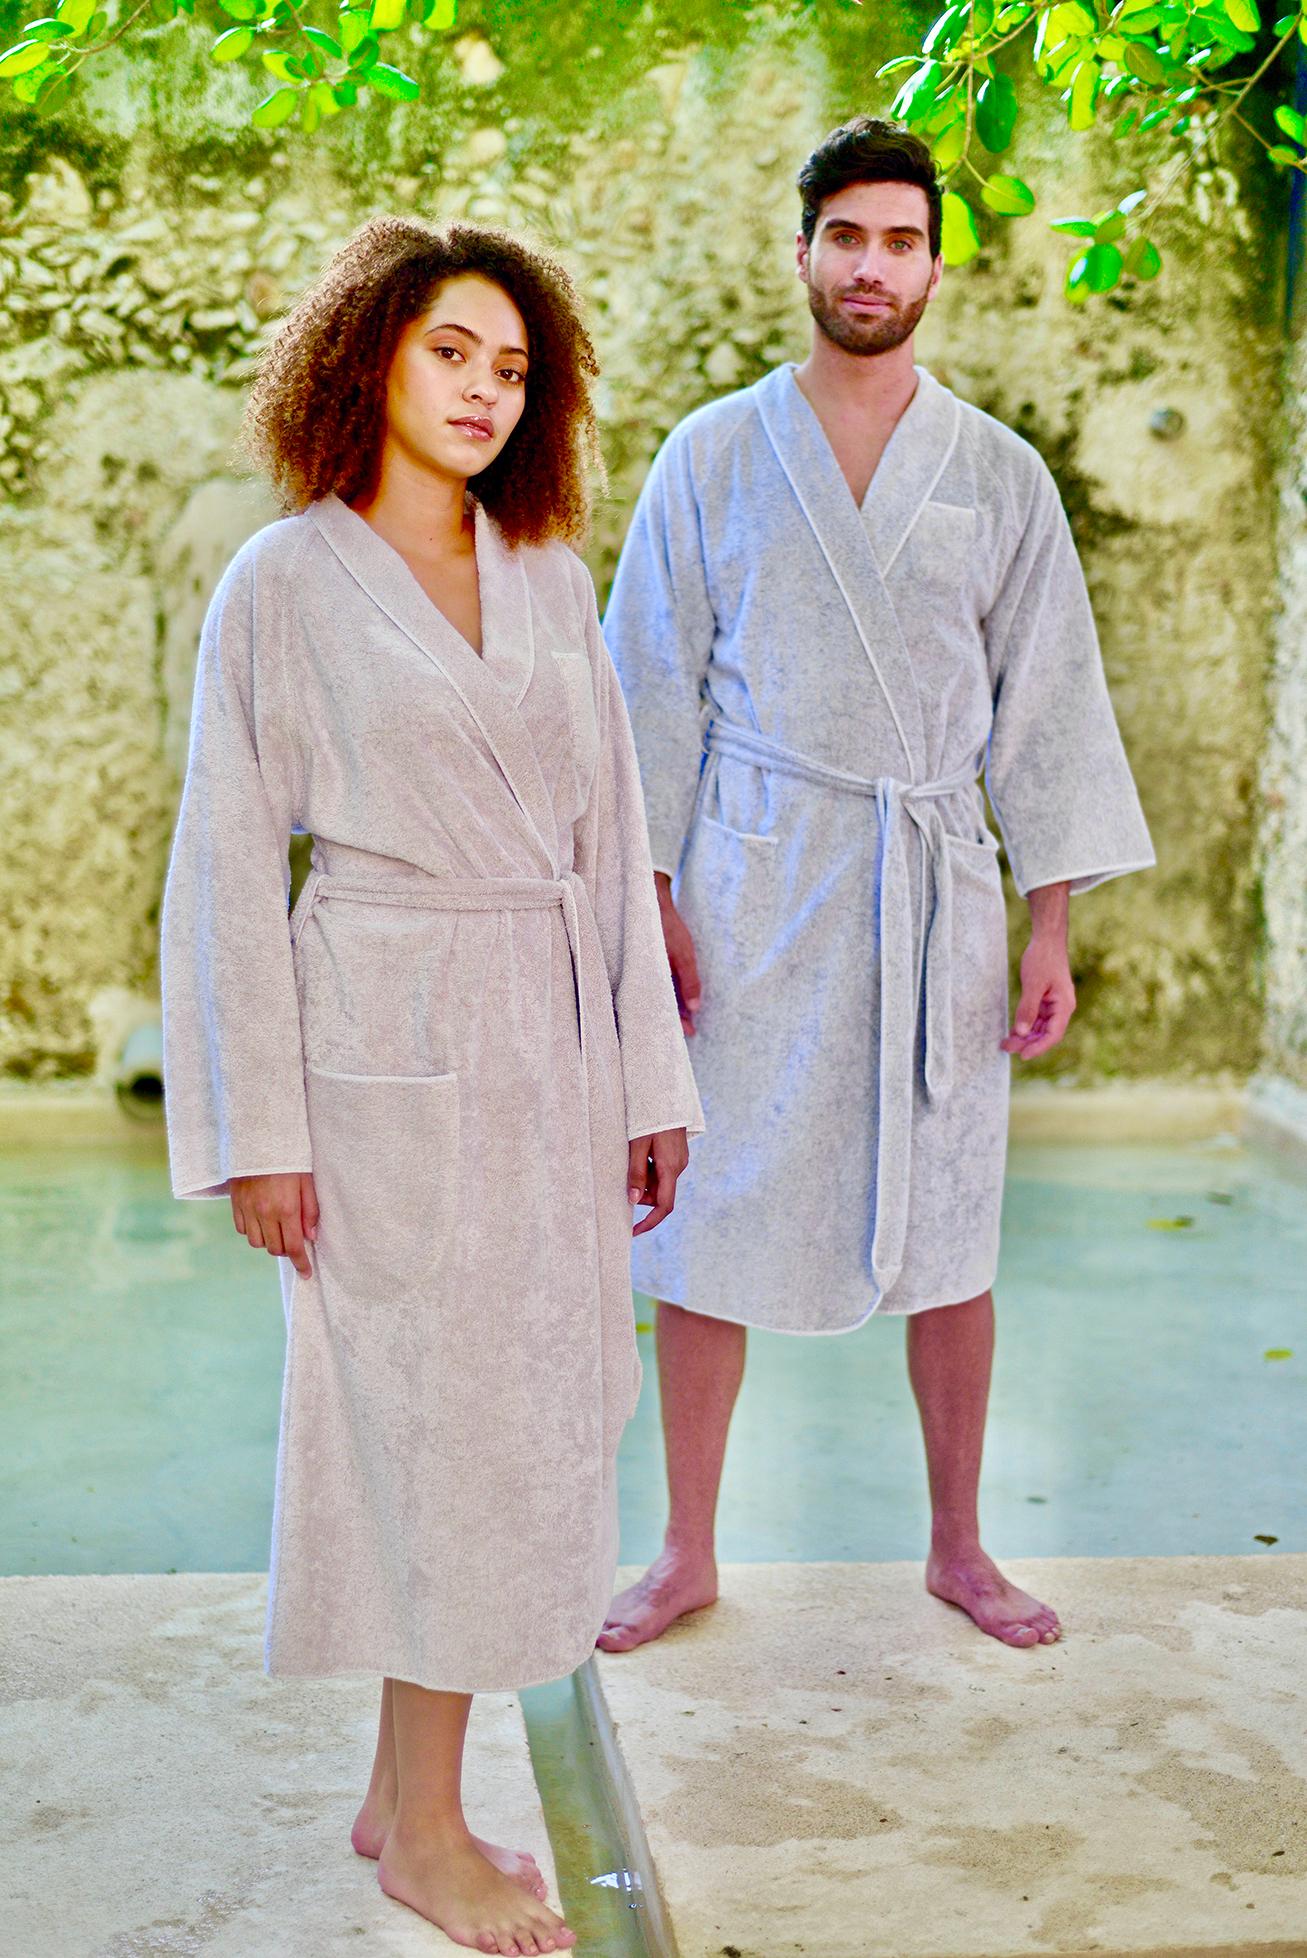 The Tuxedo towels and robes collection is available in two colours – Millenial Grey or Sand / The Madison Collection